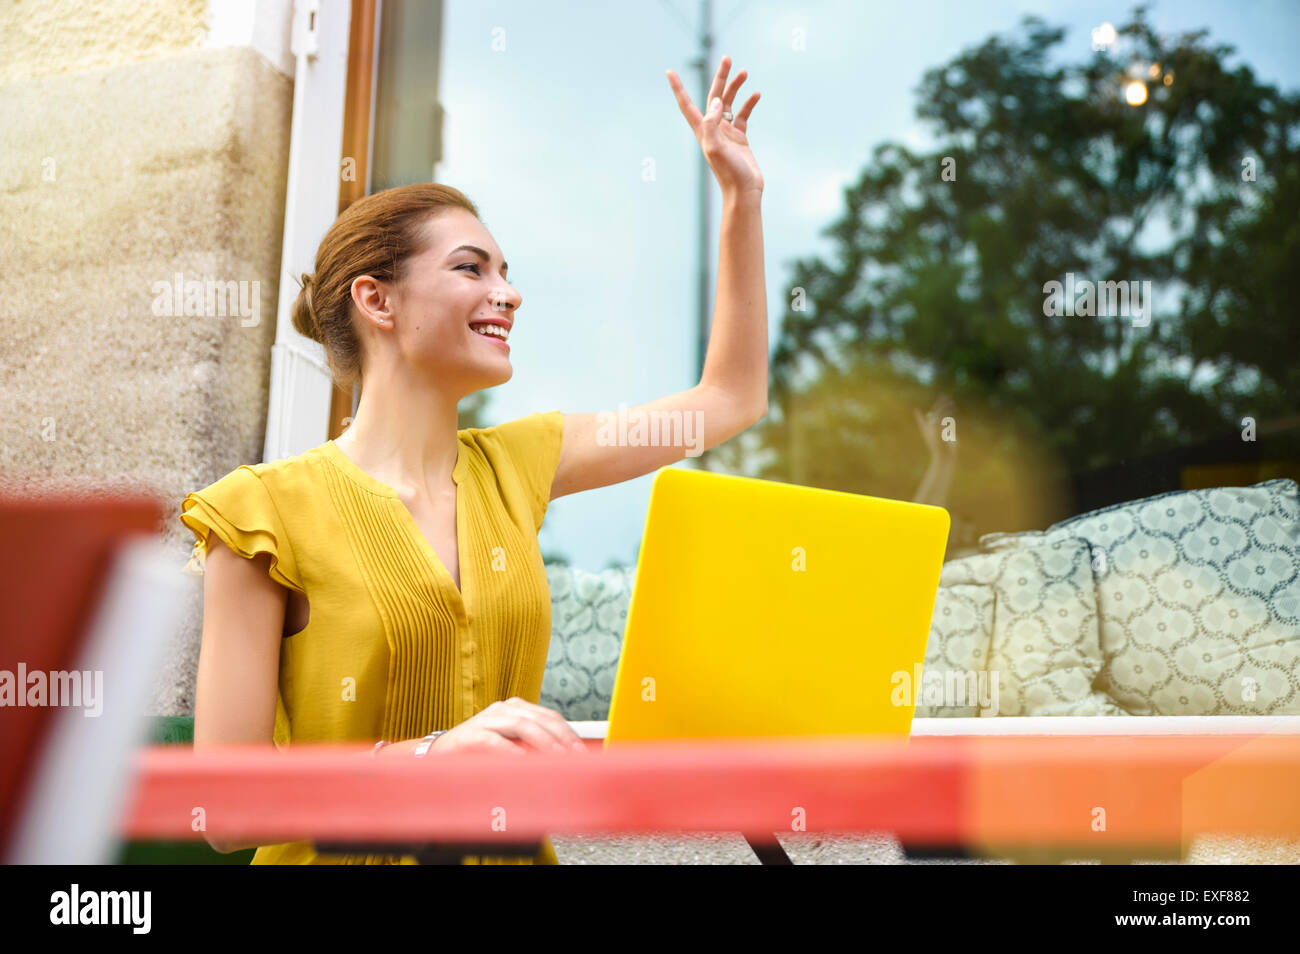 Young woman signalling to waiter, using laptop outside cafe Stock Photo